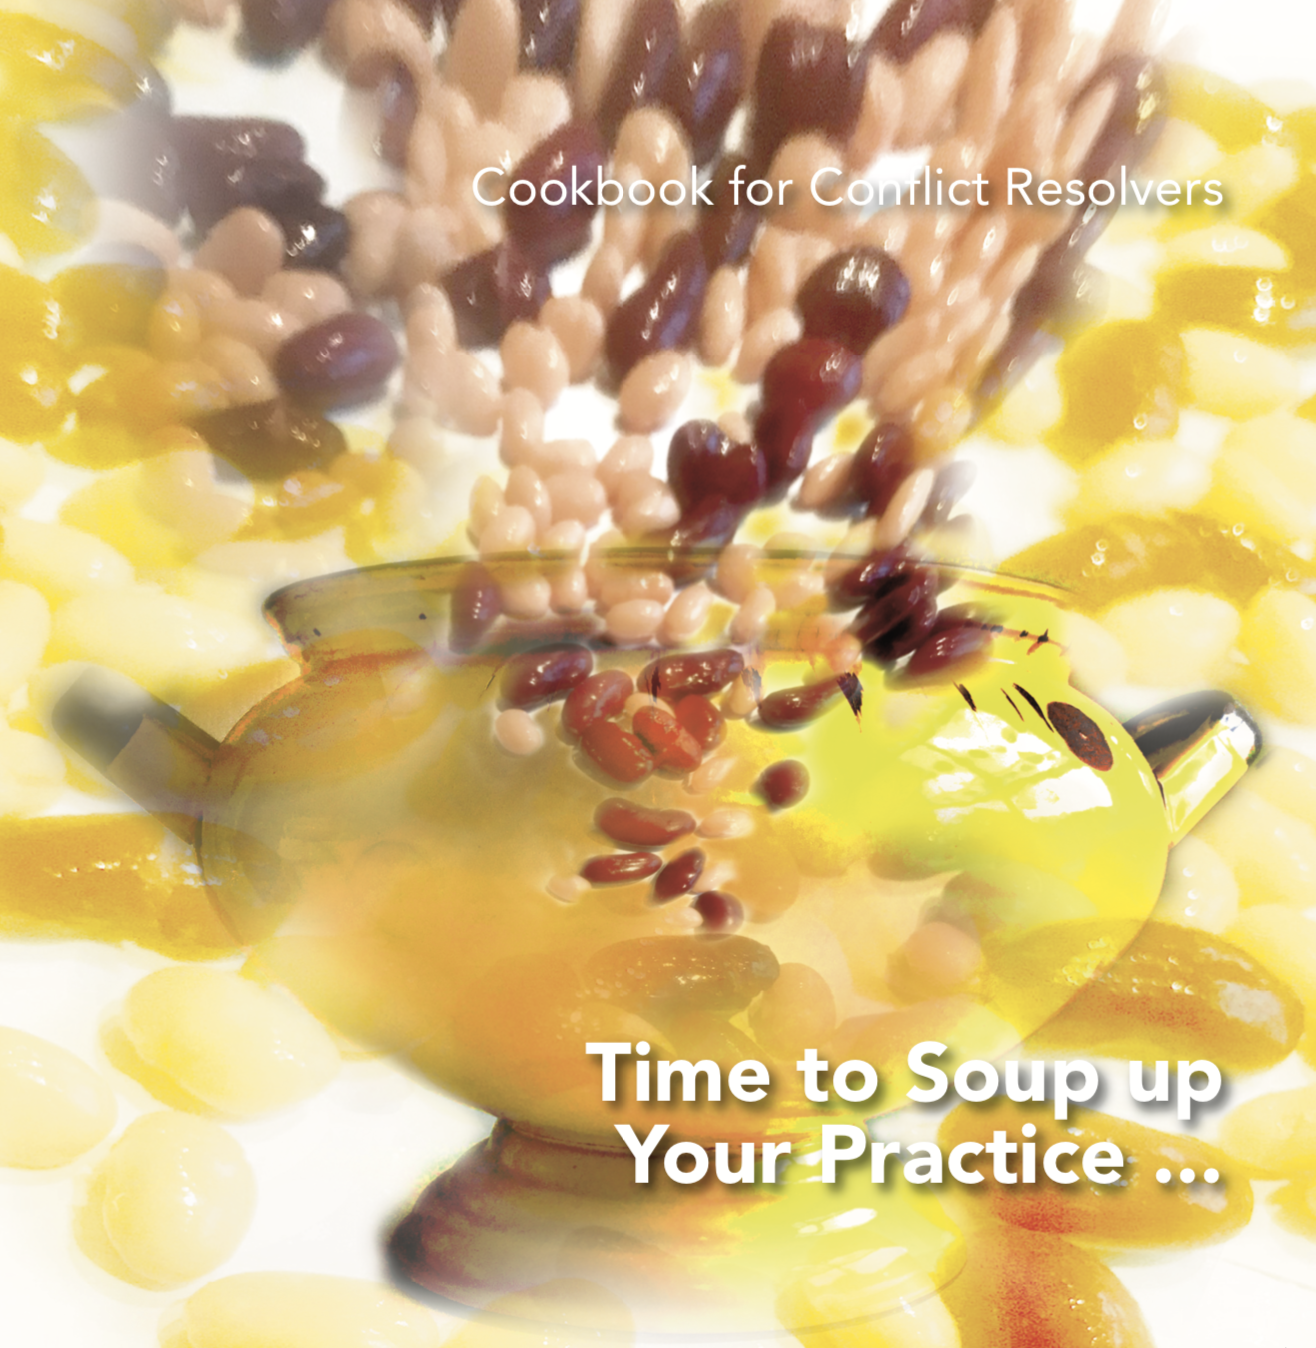 Cookbook for Conflict Resolvers 3 – Time to Soup up Your Practice